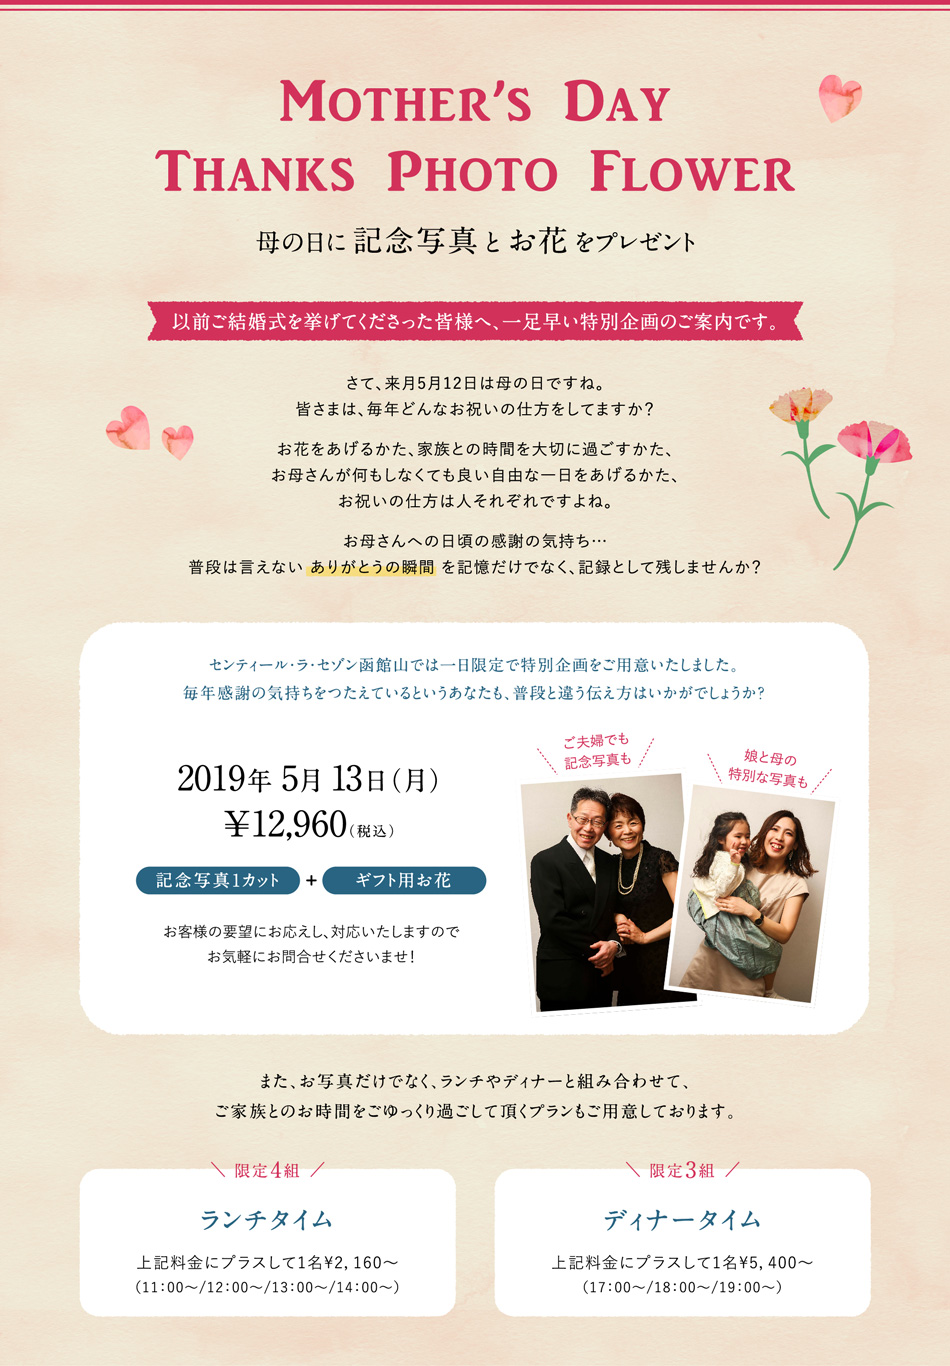 Mother’s Day Thanks Photo Flower 2019年5月13日（月）以前ご結婚式を挙げてくださった皆様へ、一足早い特別企画のご案内です。